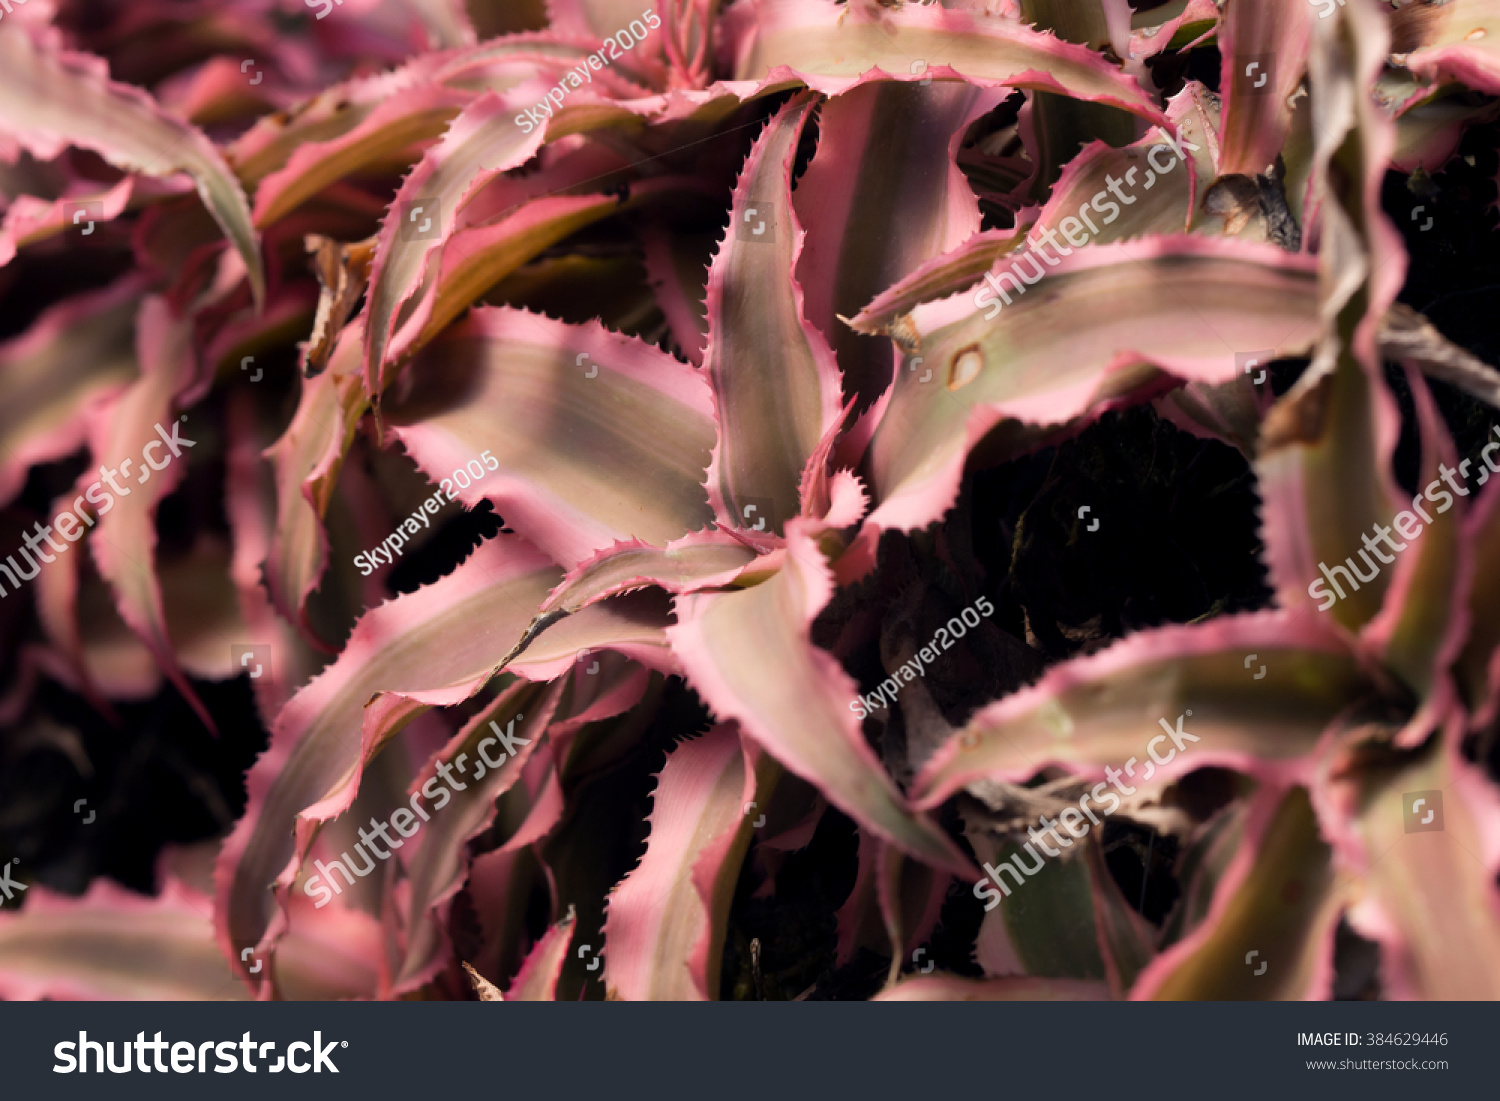 Red Starfish Plants Amazing Bright Red Stock Photo Edit Now 384629446